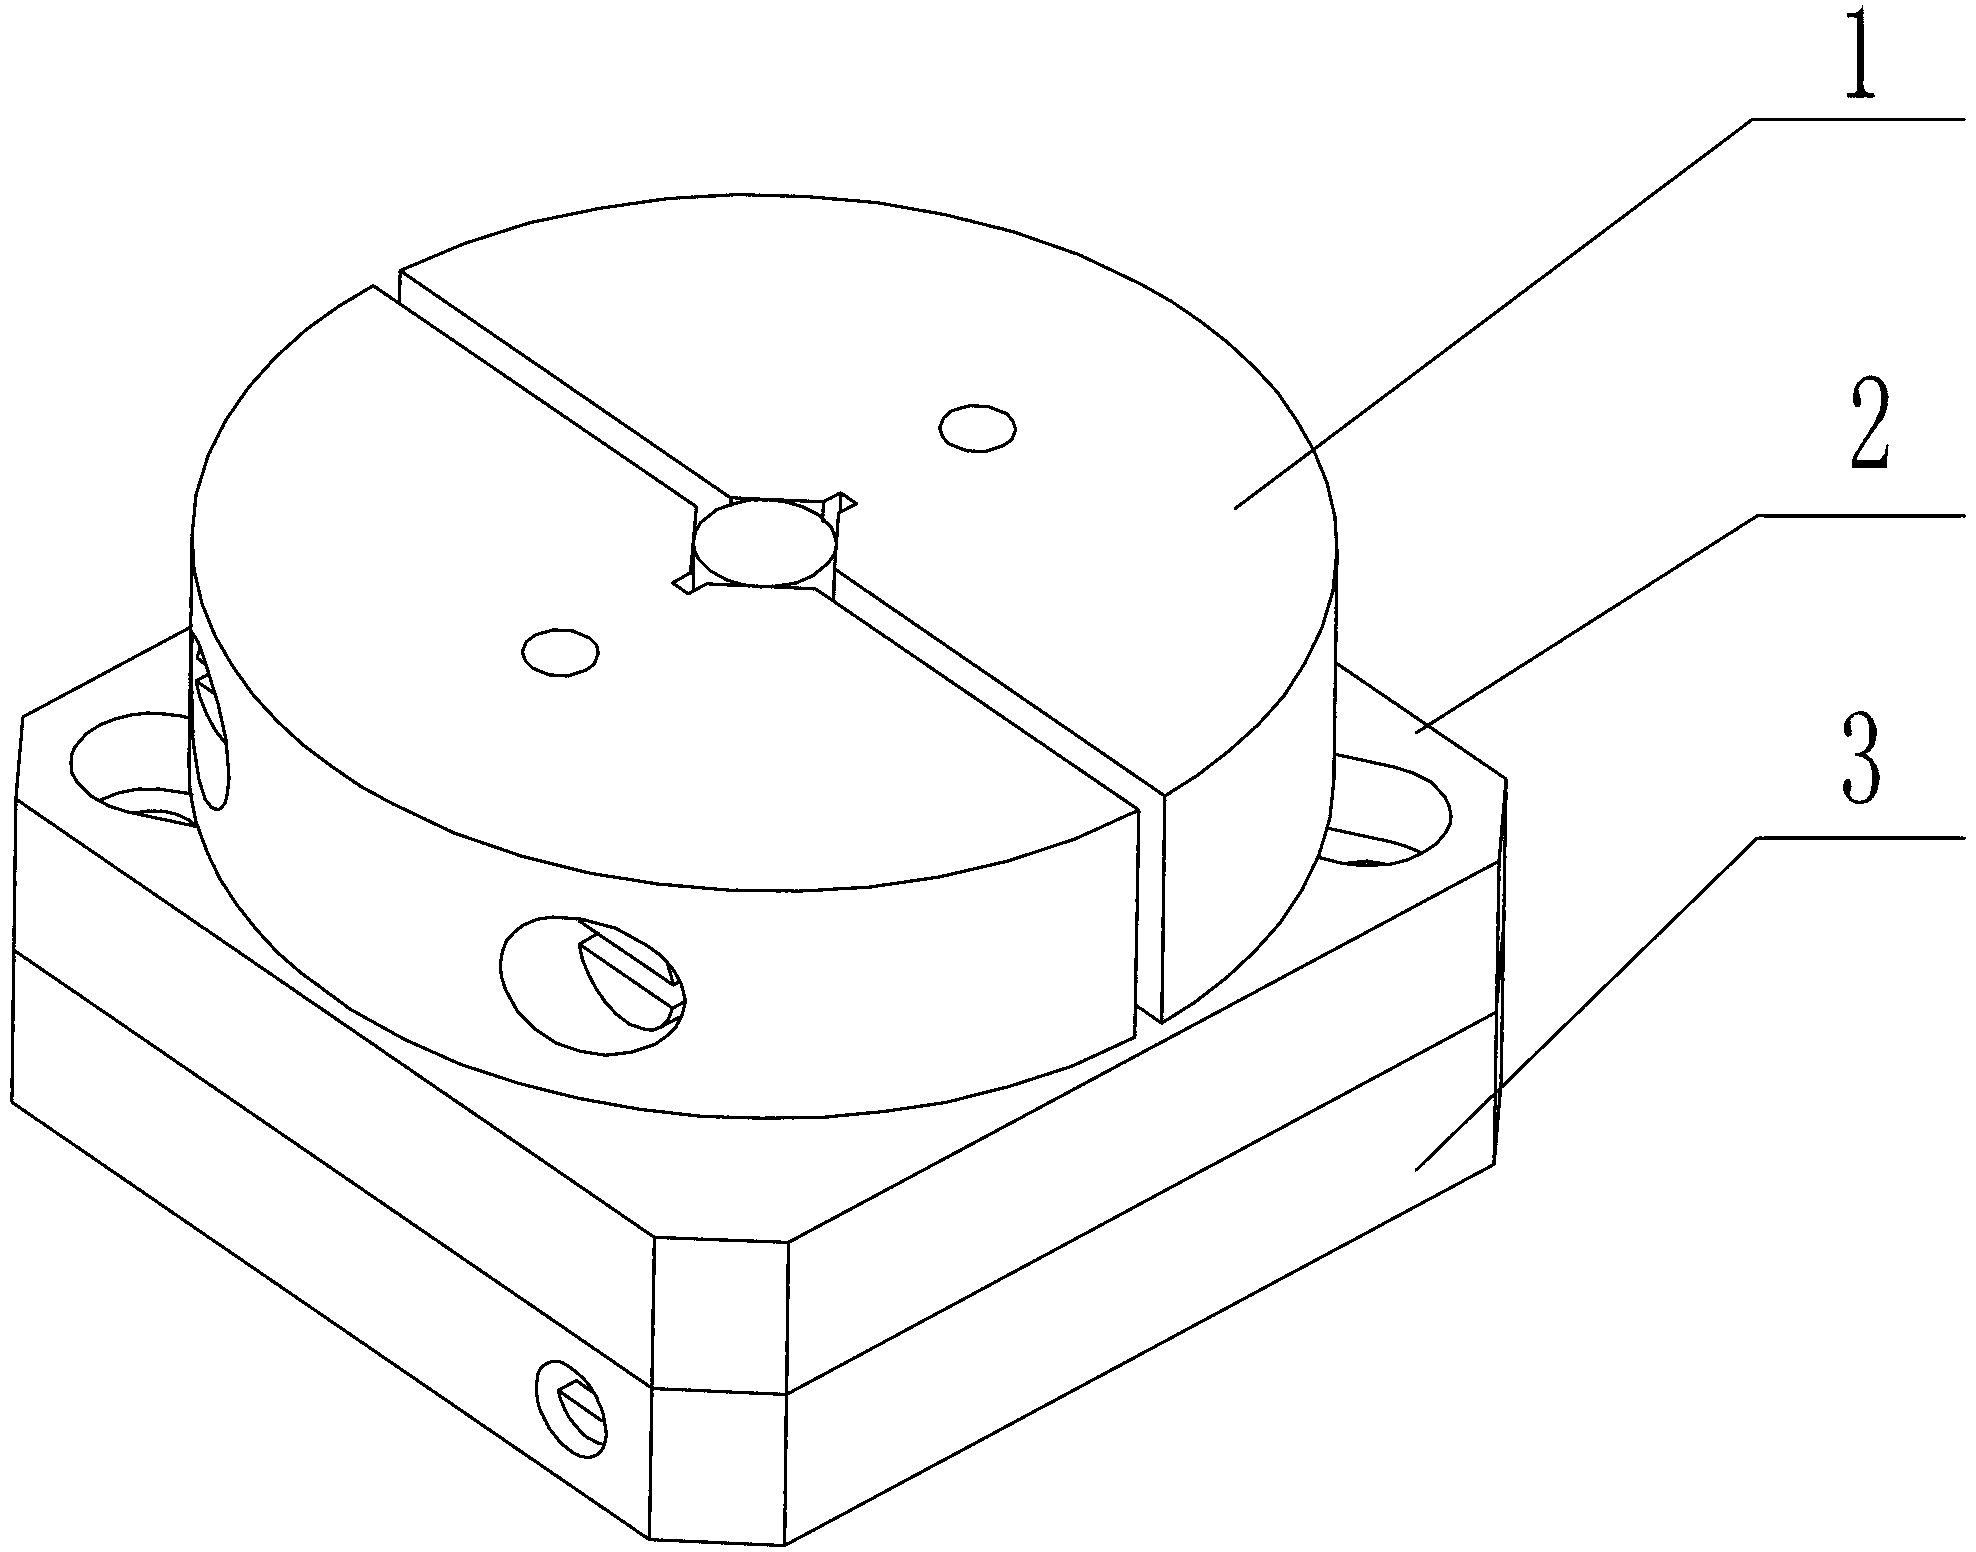 Stick-slip rotating and positioning device